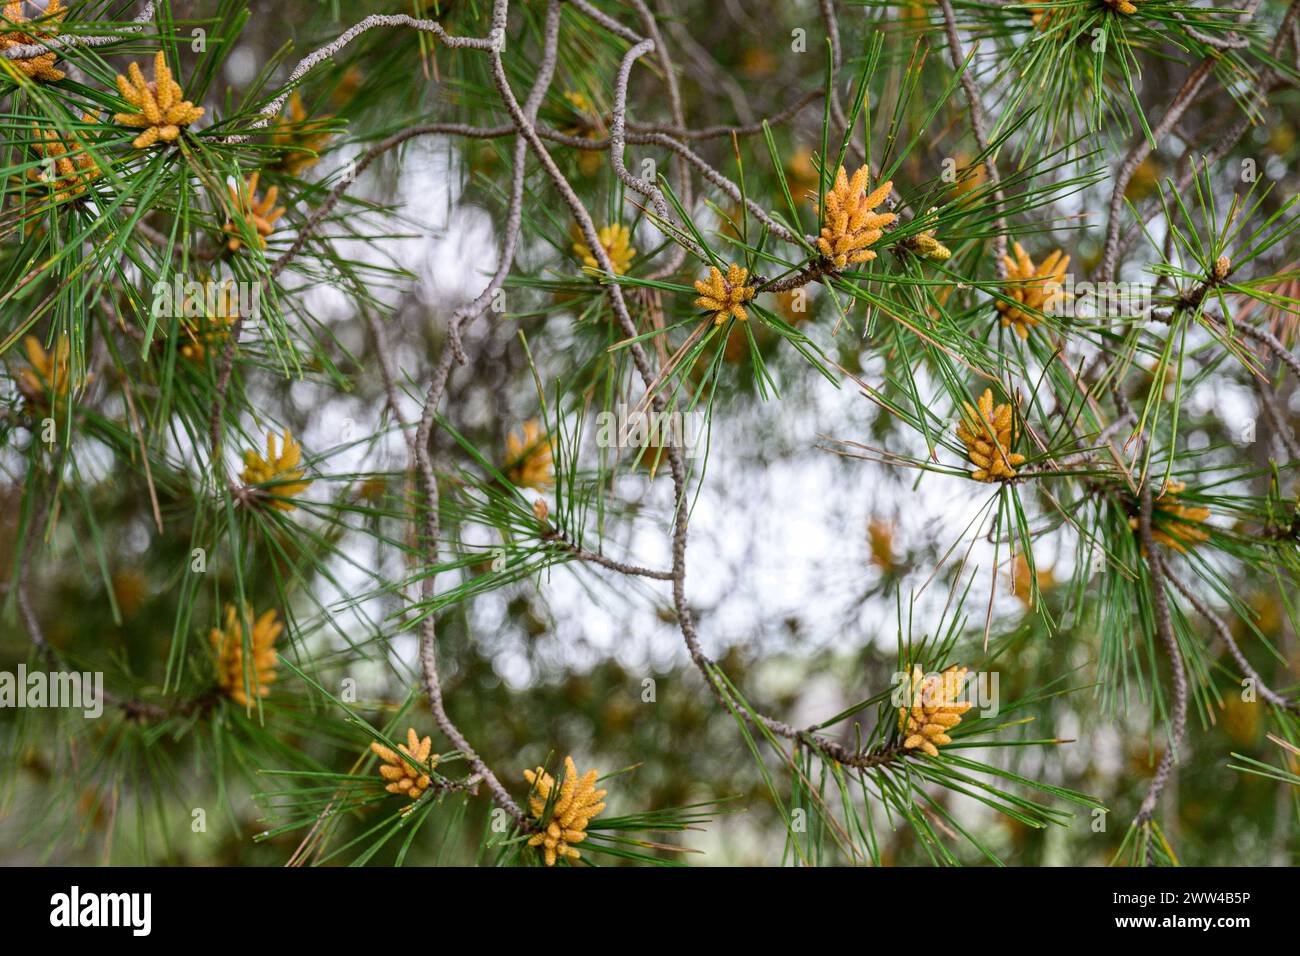 Male flowers of the Aleppo Pine Pinus halepensis, commonly known as the Aleppo pine, also known as the Jerusalem pine, is a pine native to the Mediter Stock Photo